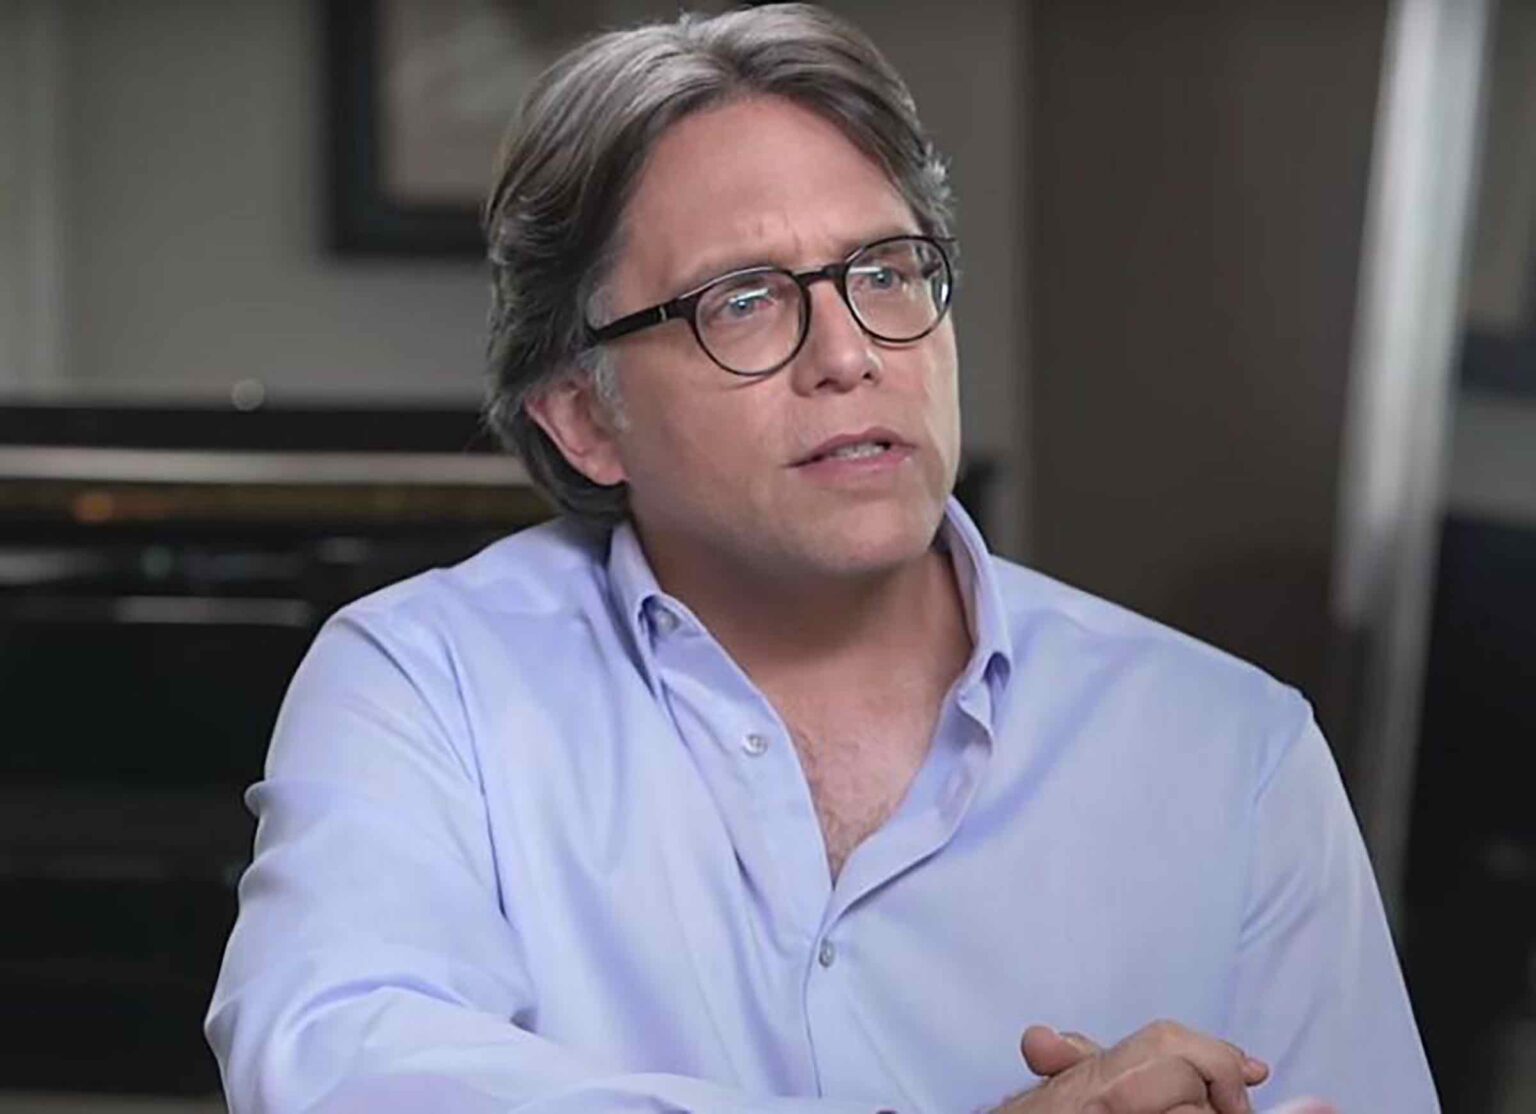 NXIVM founder Keith Raniere has been convicted of multiple charges – but still claims he's innocent. Here's why he believes a new trial is necessary.